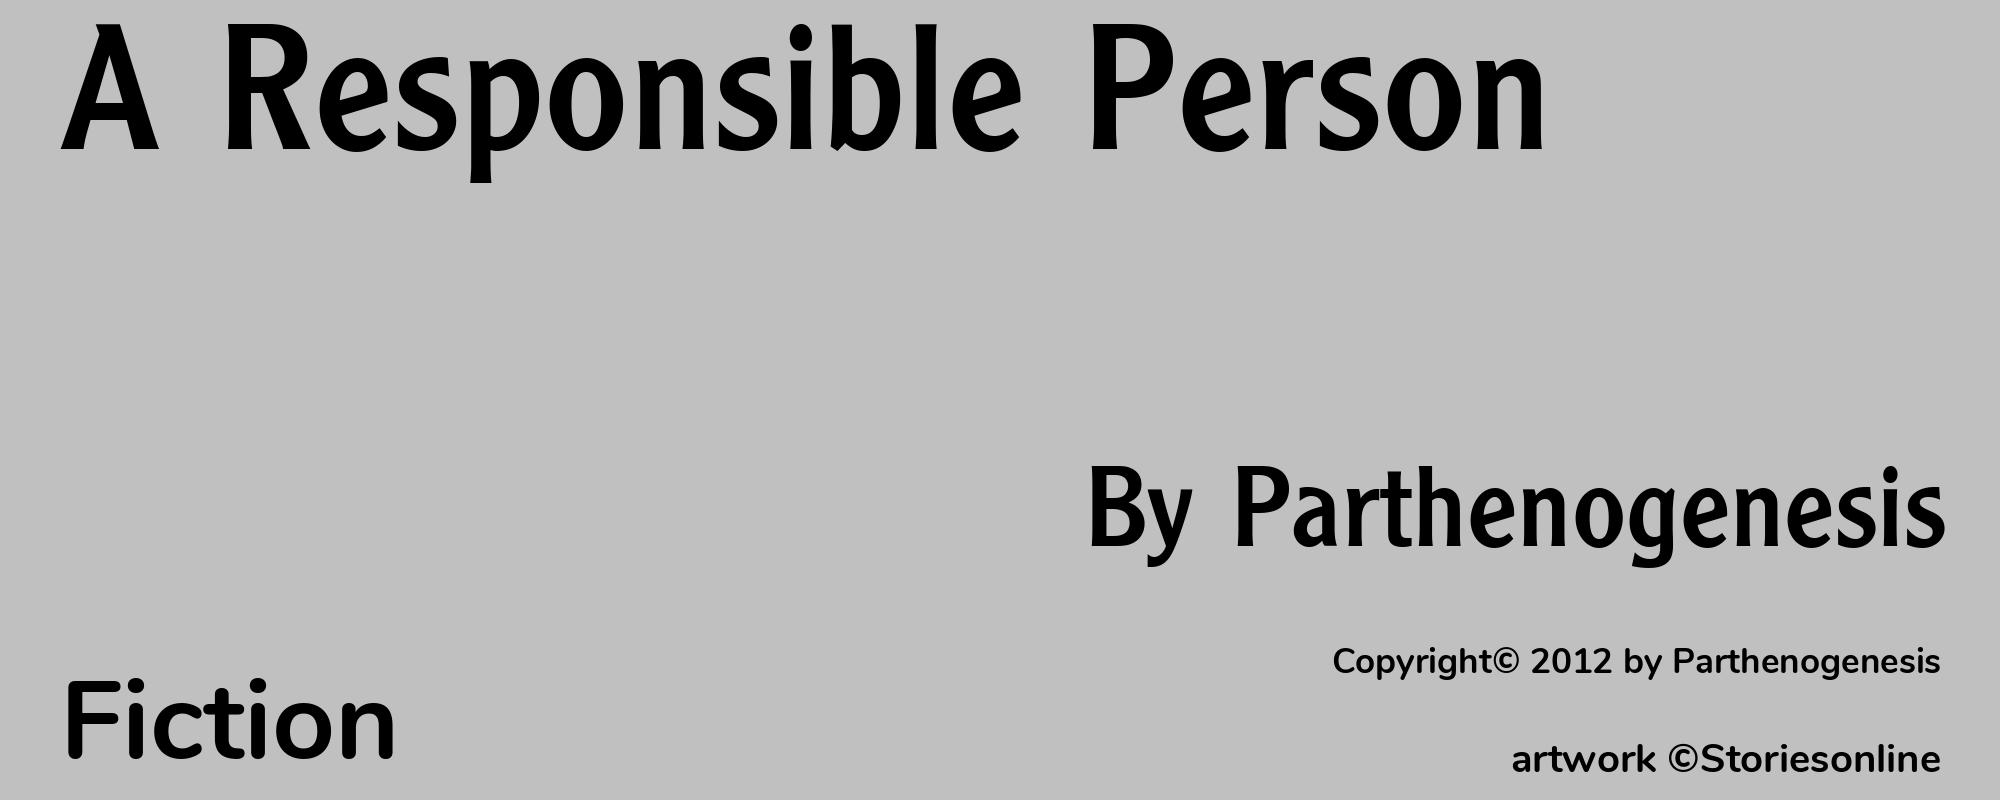 A Responsible Person - Cover